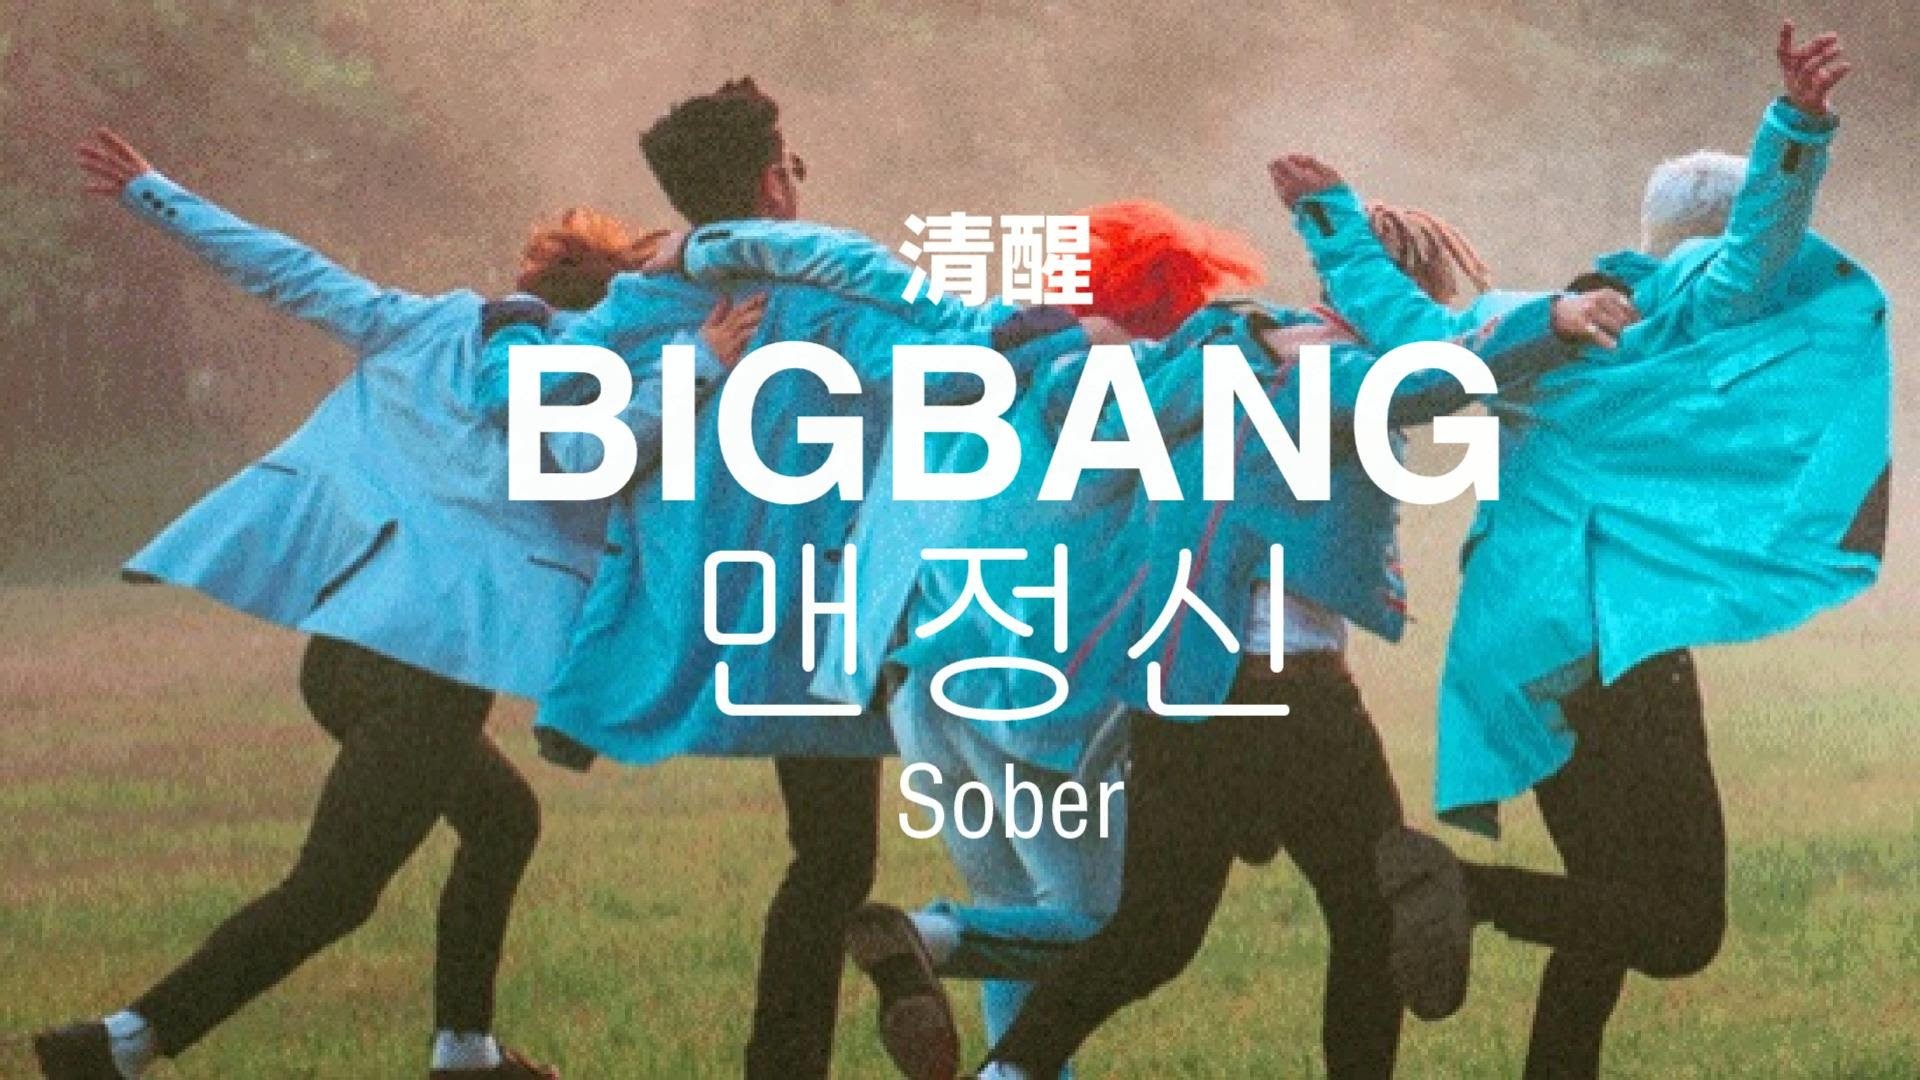 1920x1080 Search Results for “big bang sober wallpaper” – Adorable Wallpapers